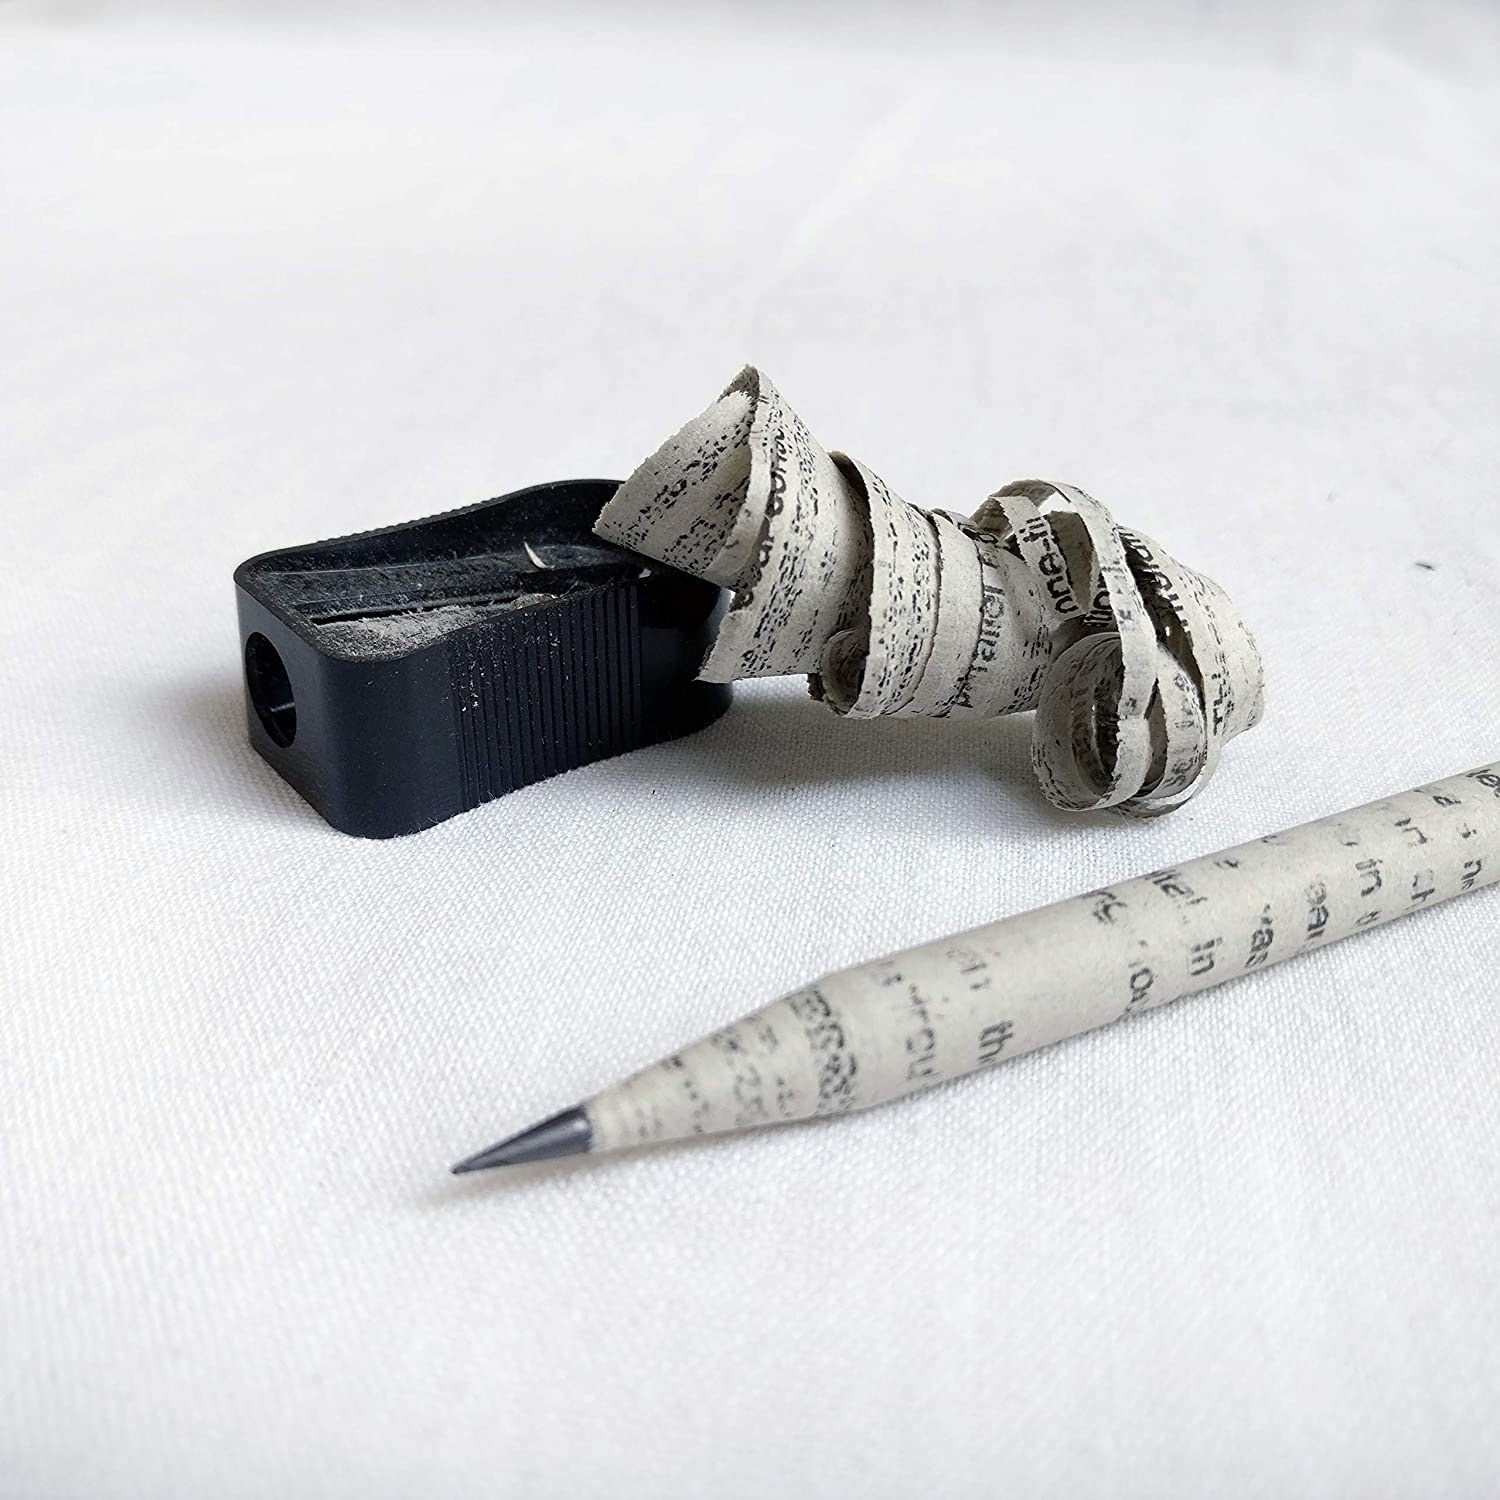 A recycled newspaper pencil pictured with a black sharpener and pencil shavings.